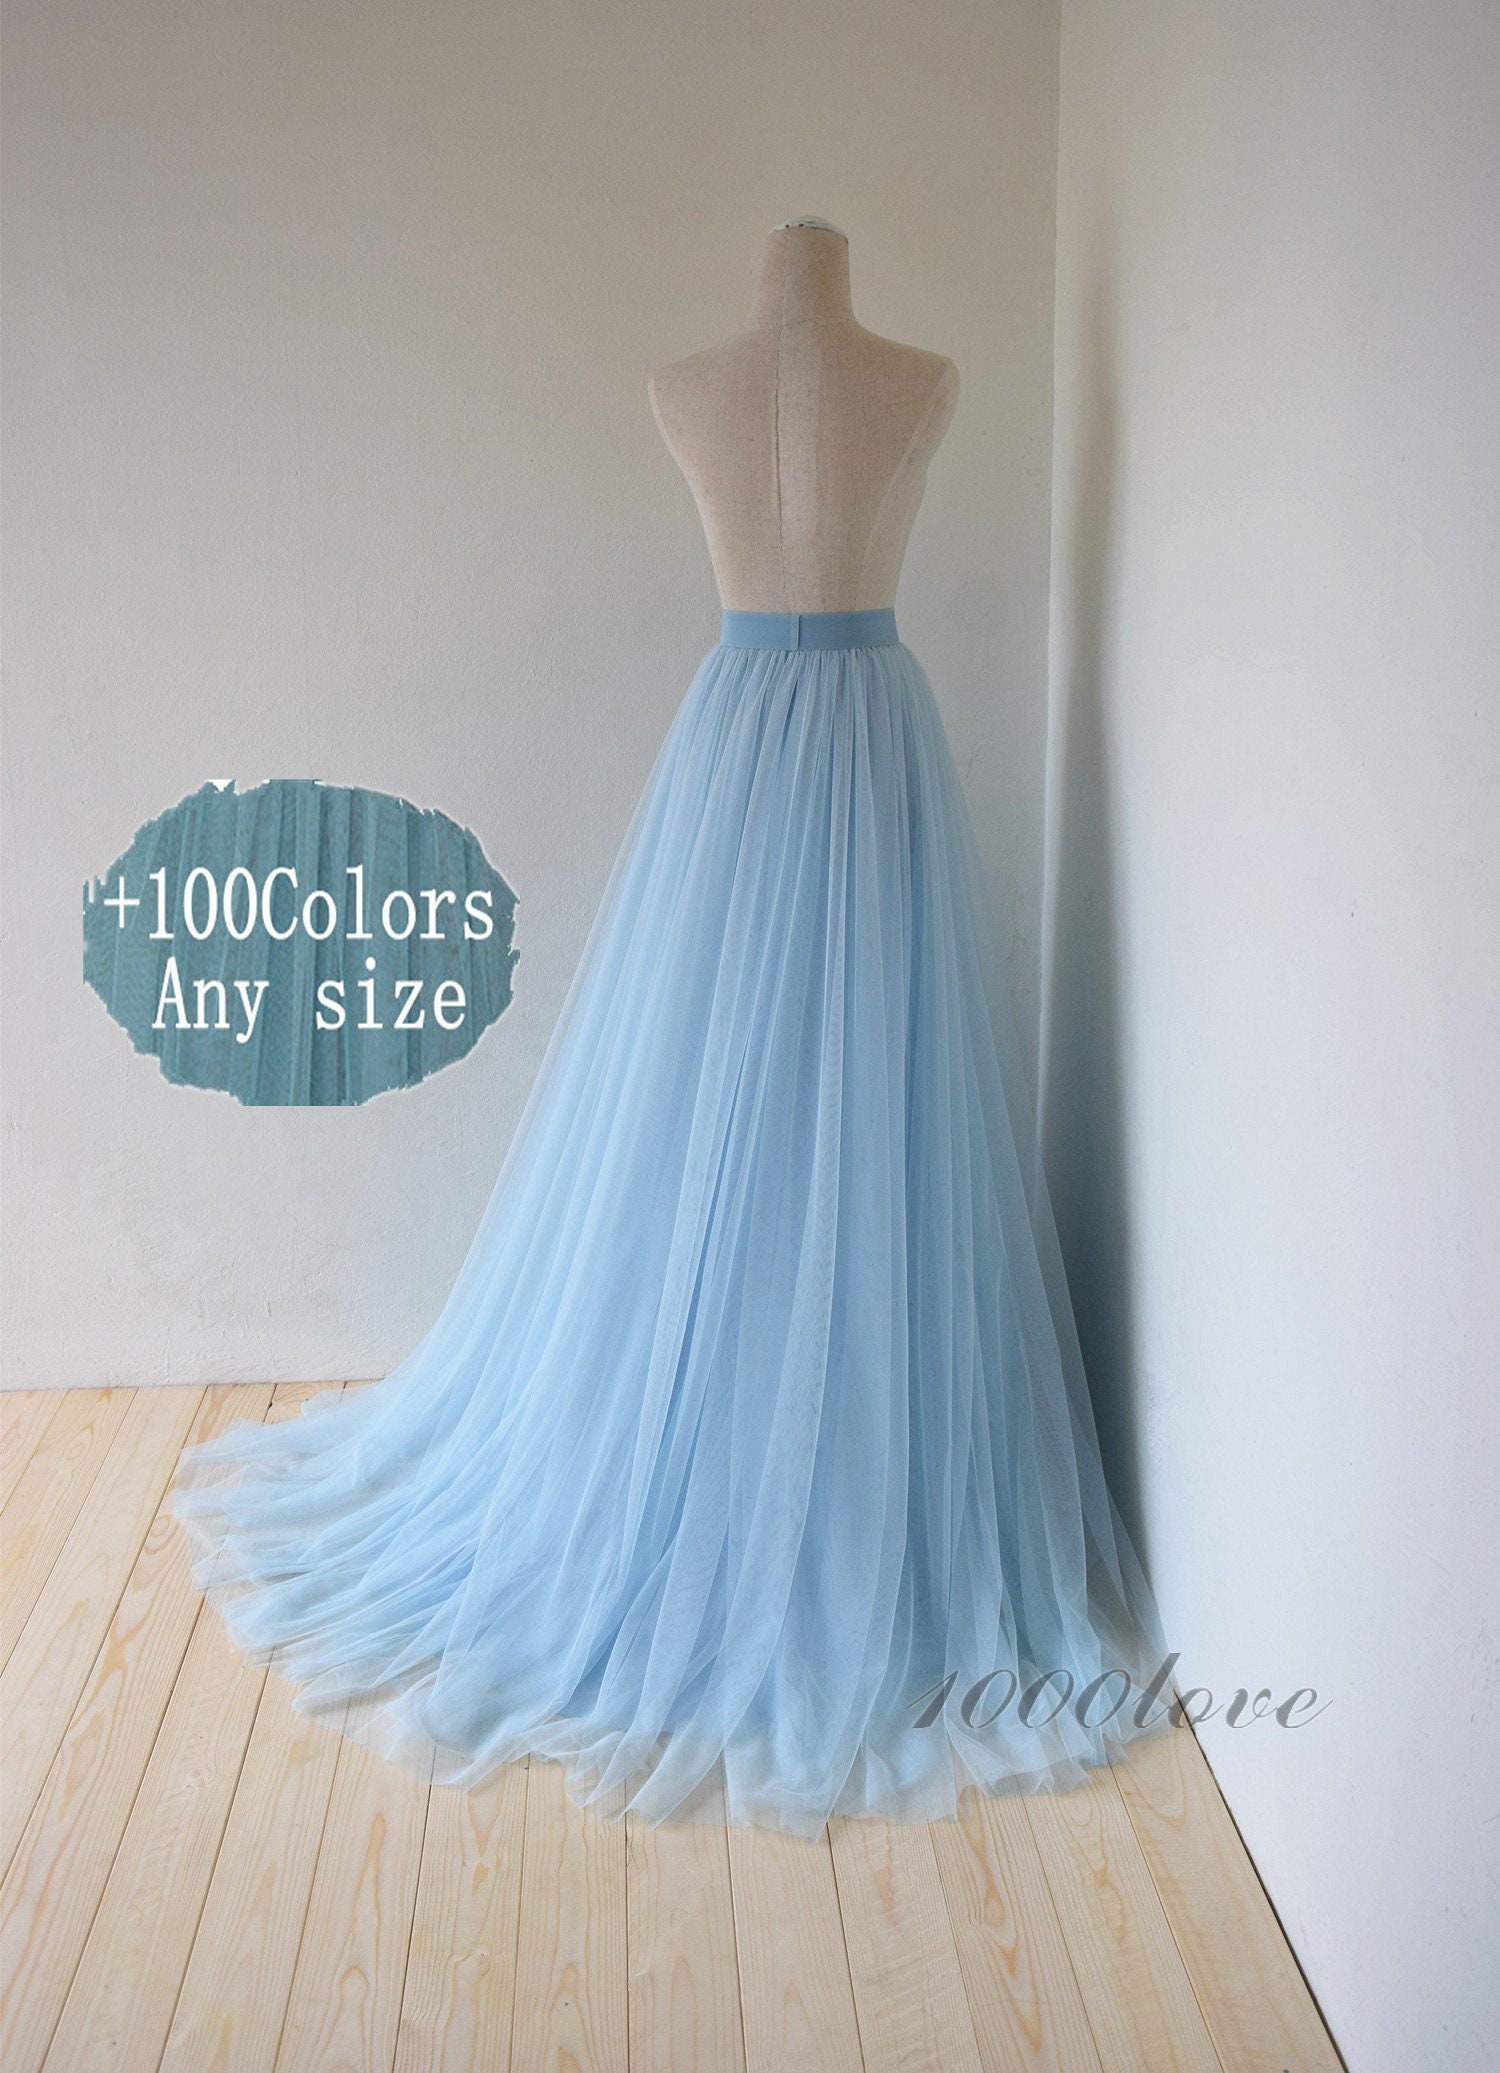 Baby Blue Maxi Tulle Skirt With A Train, Evening Long Skirt, Bridesmaid Dress, Photo Shoot